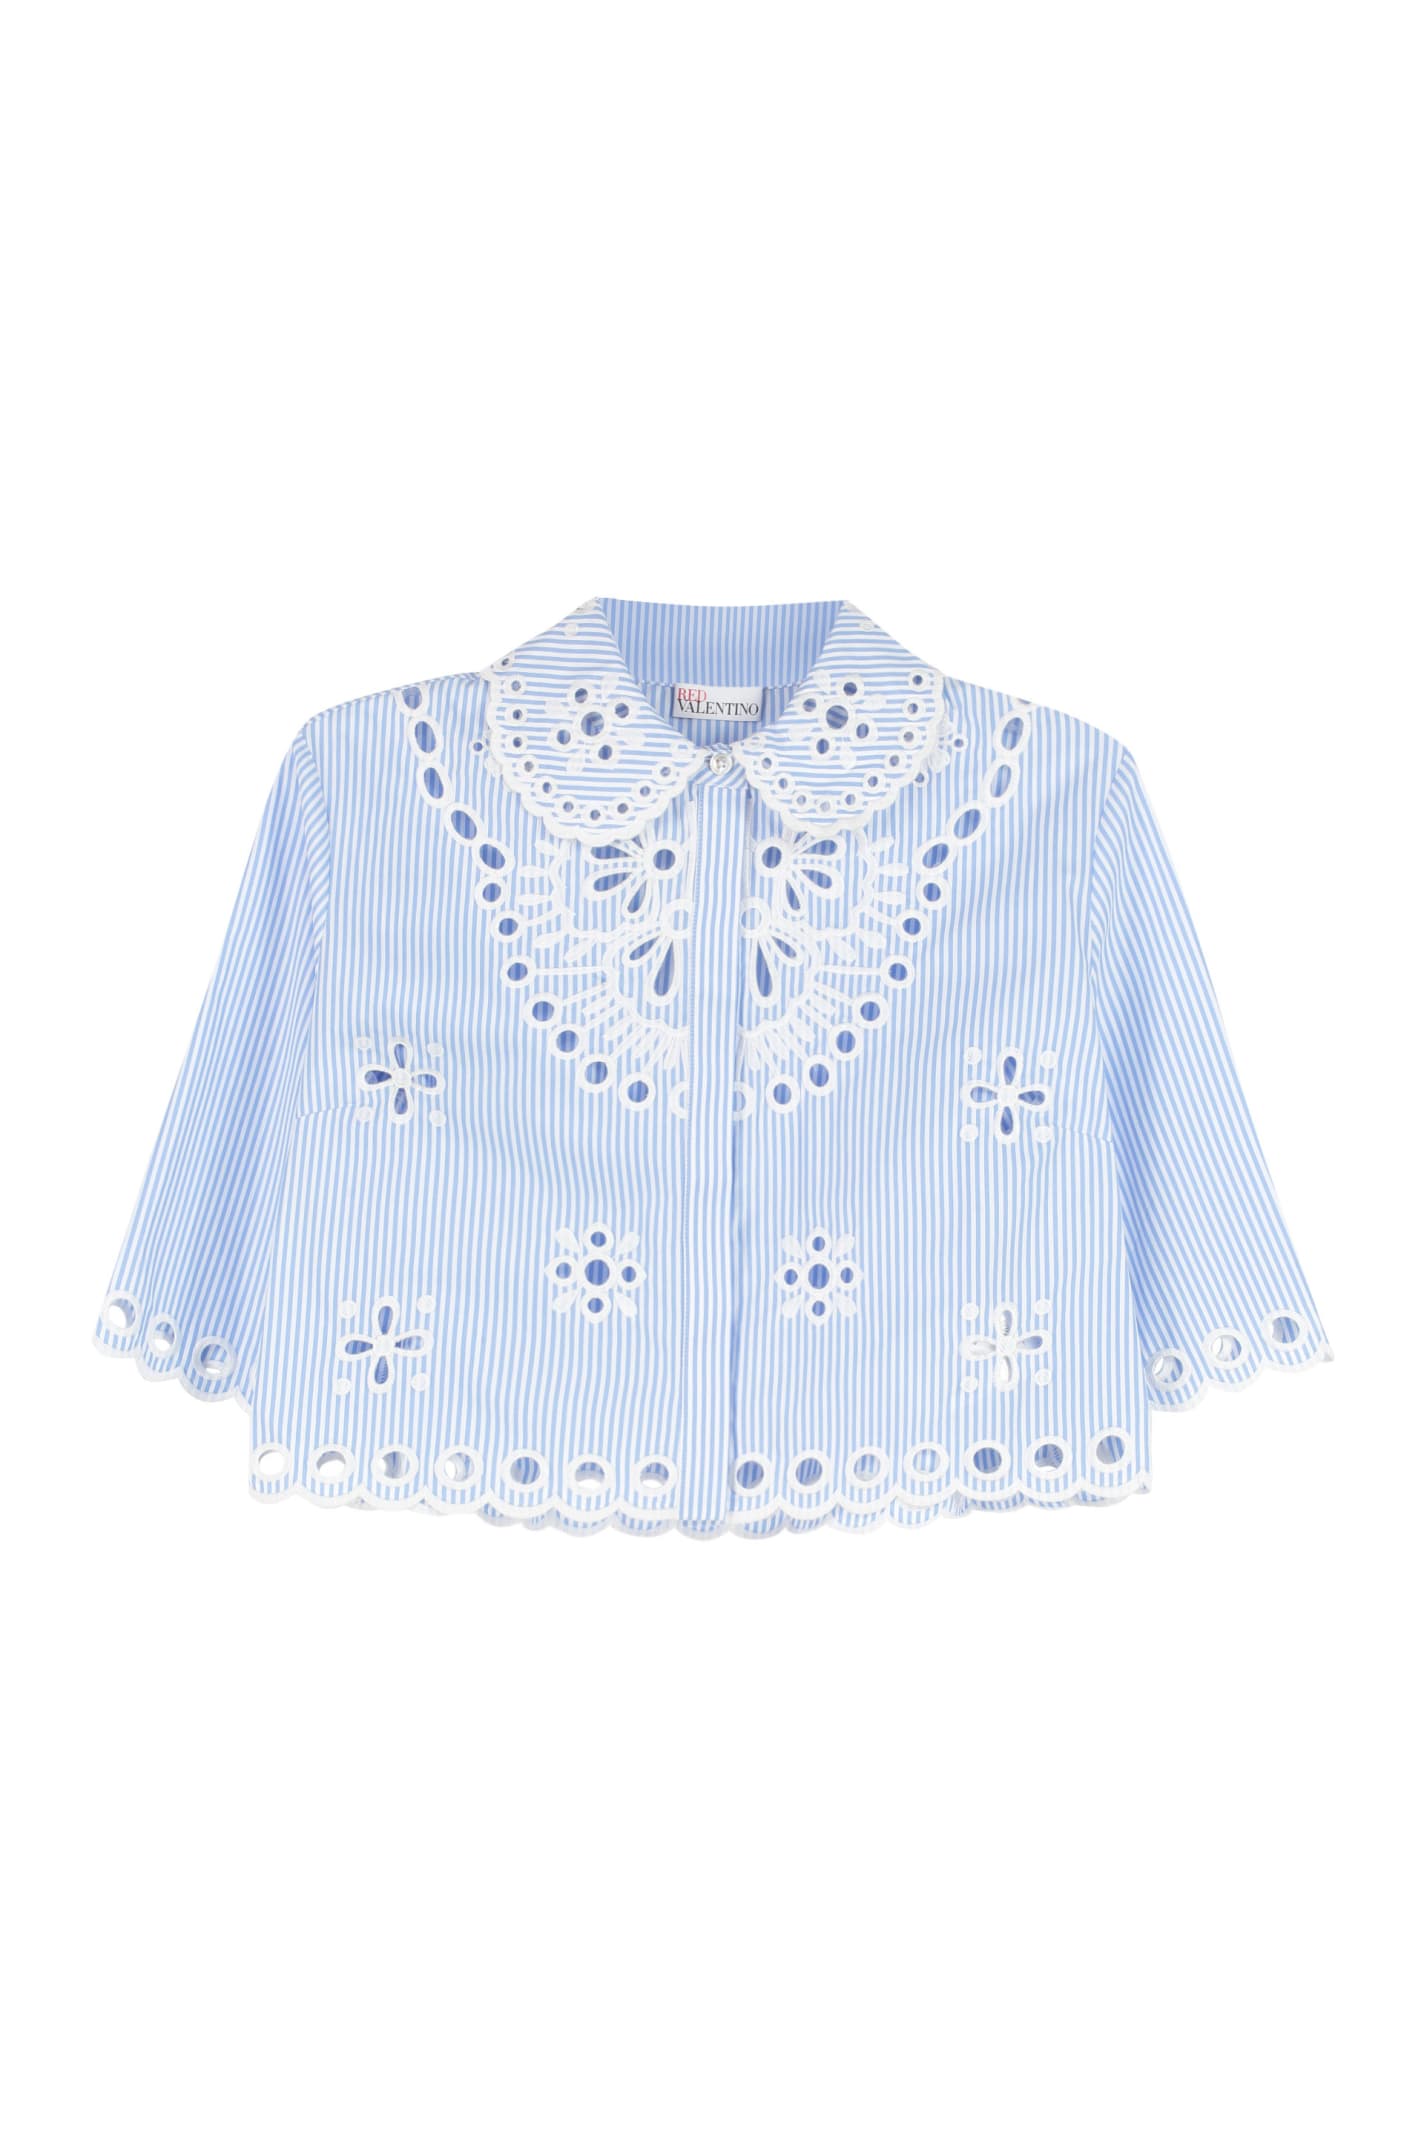 RED Valentino Embroidered Striped Cotton Shirt